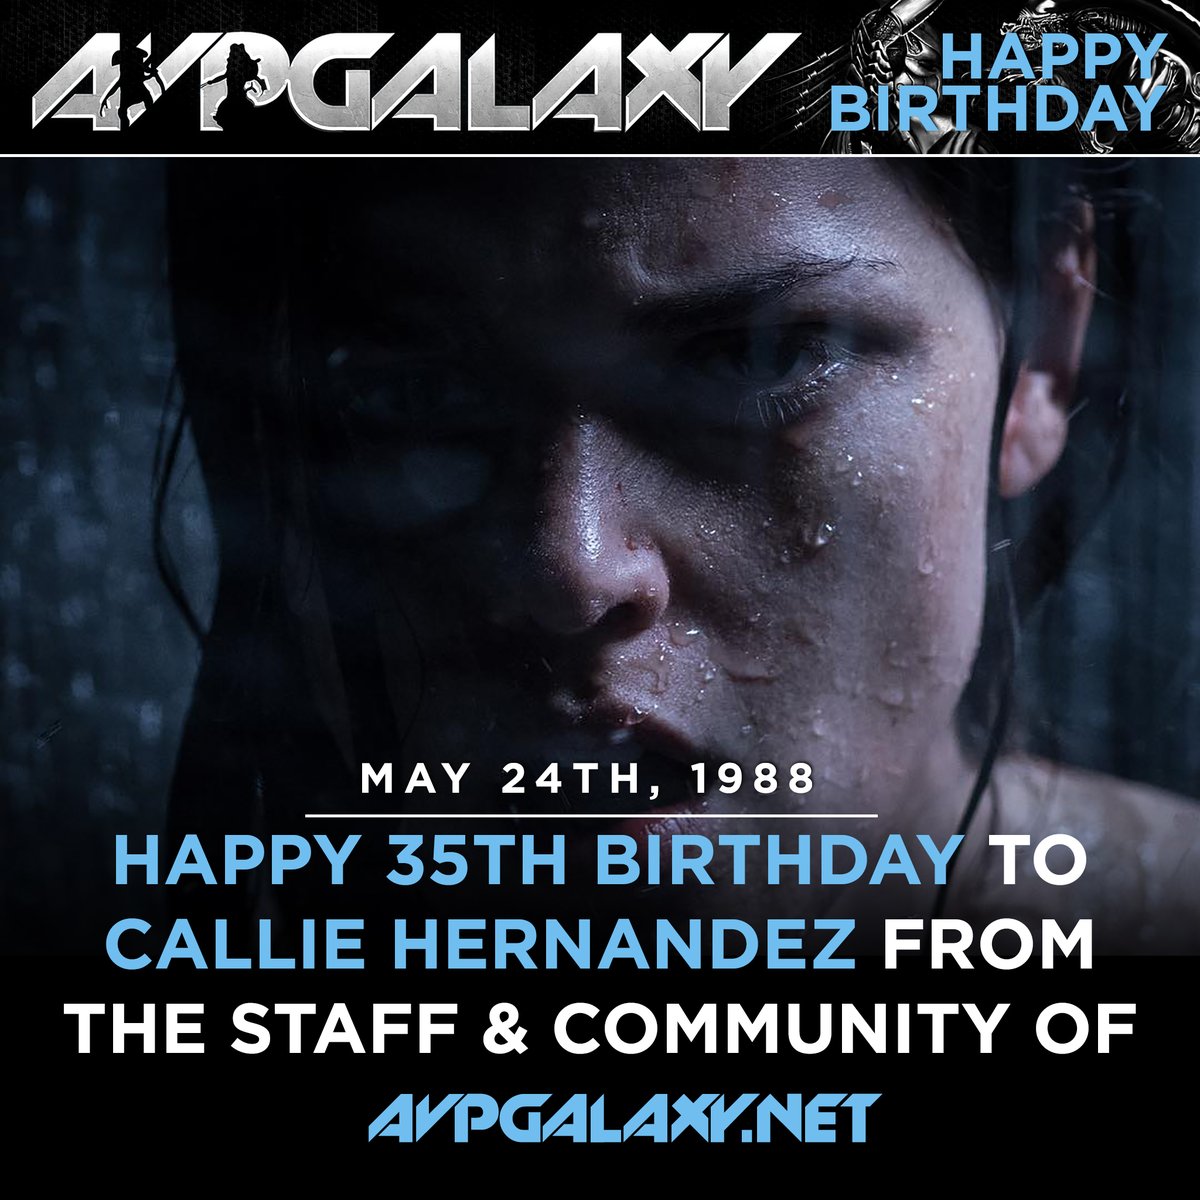 The staff and community of Alien vs. Predator Galaxy would like to wish Alien: Covenant's Callie Hernandez a happy 35th birthday! #CallieHernandez #AlienCovenant #Prometheus #HappyBirthday #HappyBurstday